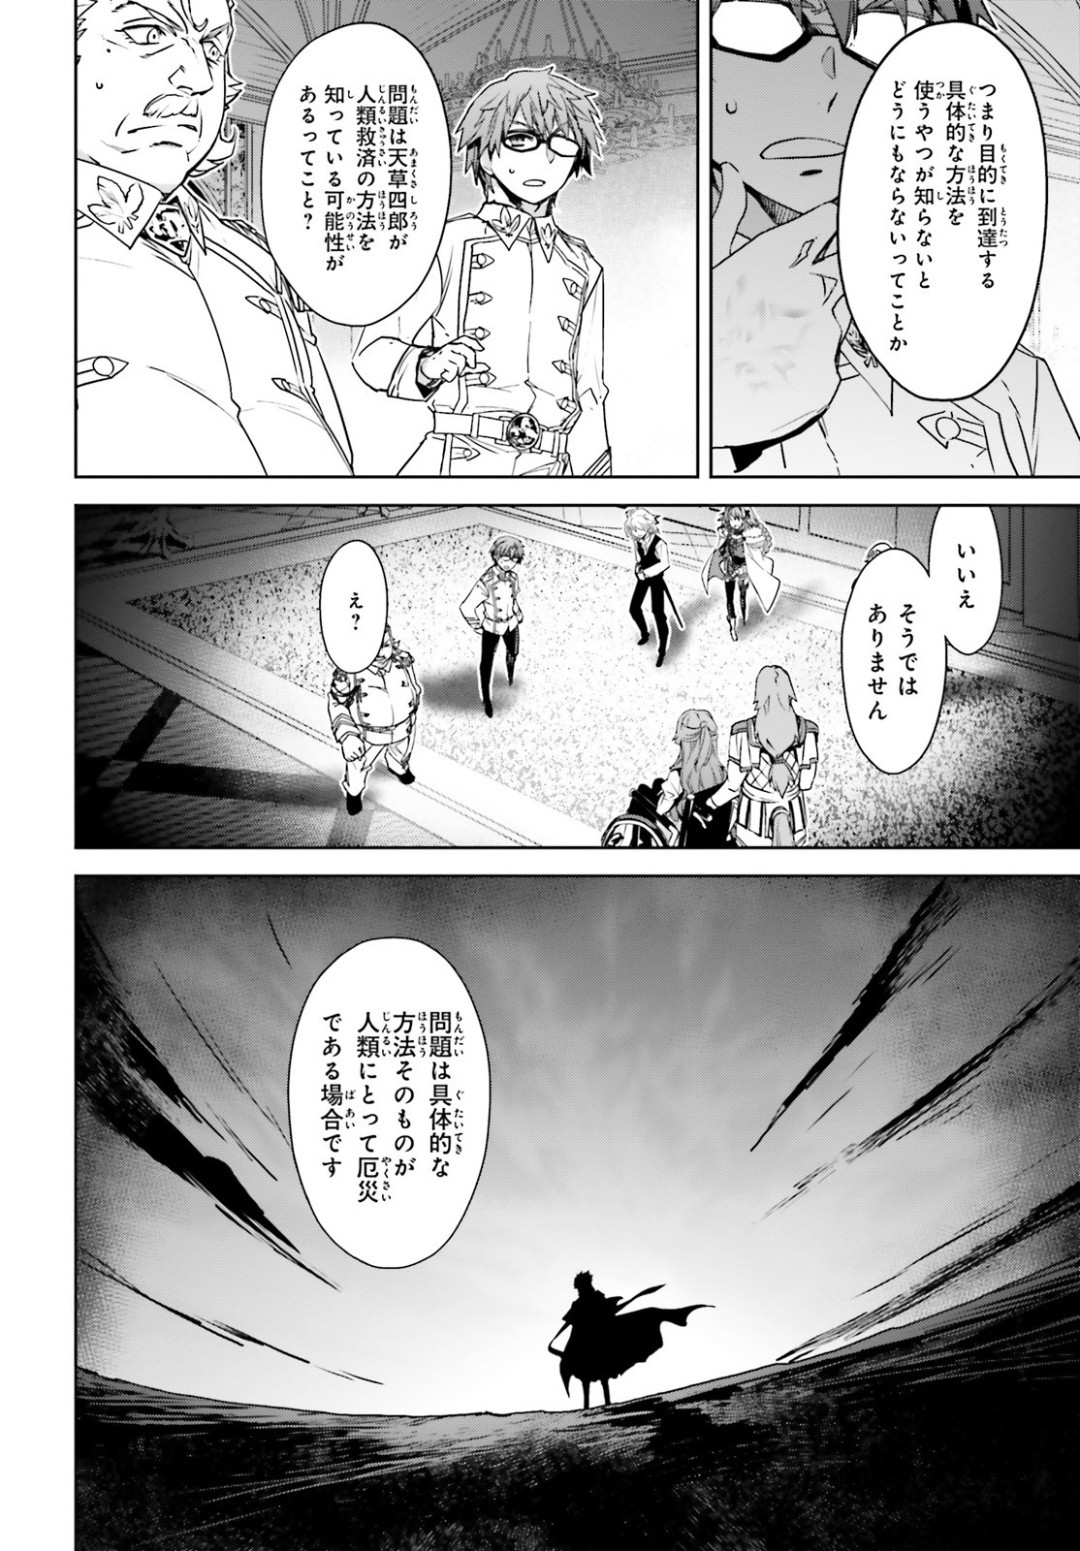 Fate-Apocrypha - Chapter 39 - Page 4